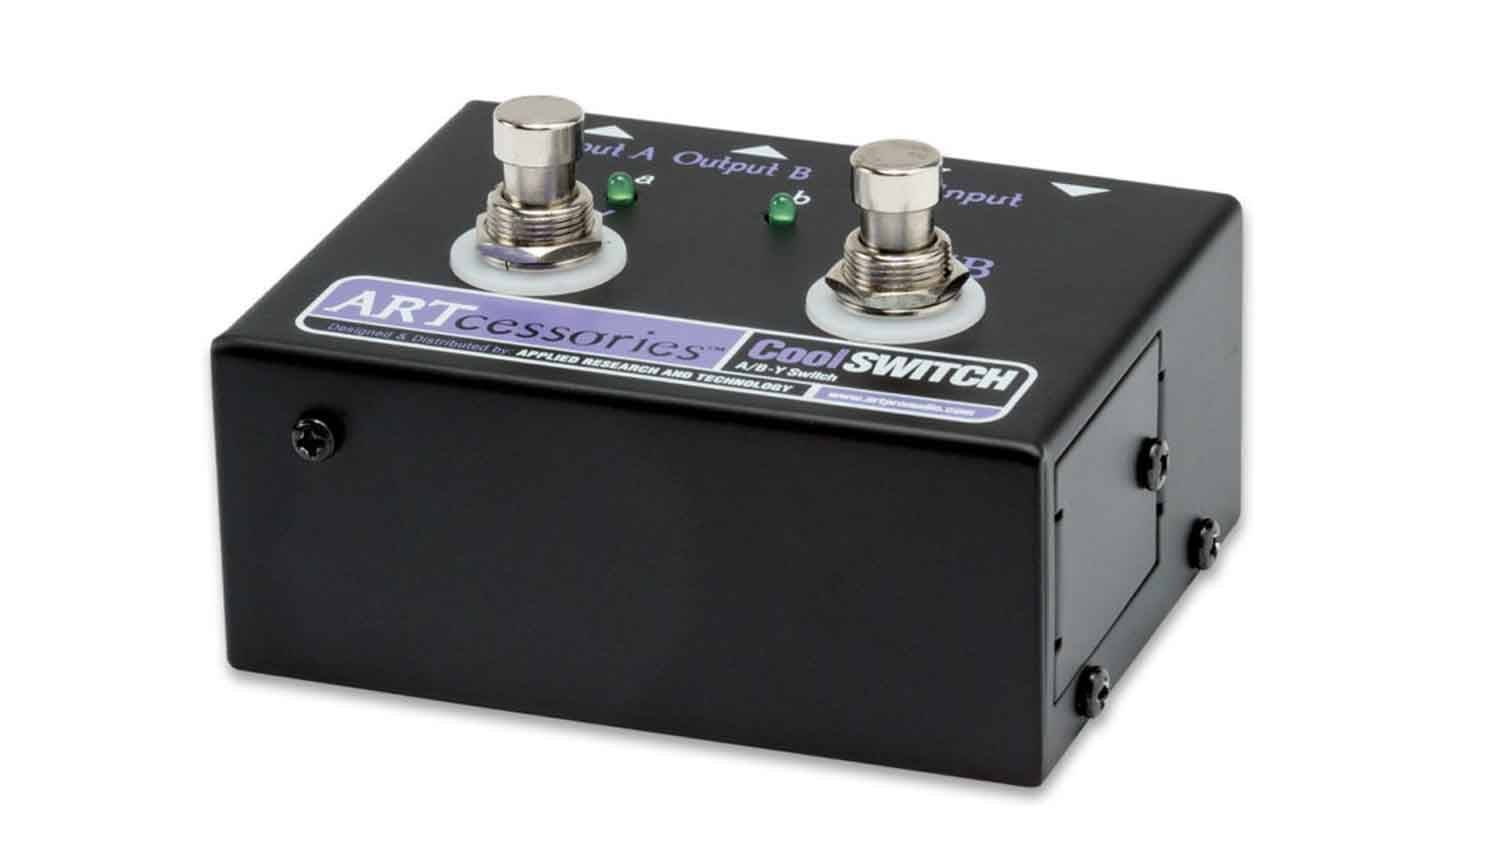 Art CoolSwitch A/B-Y Switching Pedal - Hollywood DJ